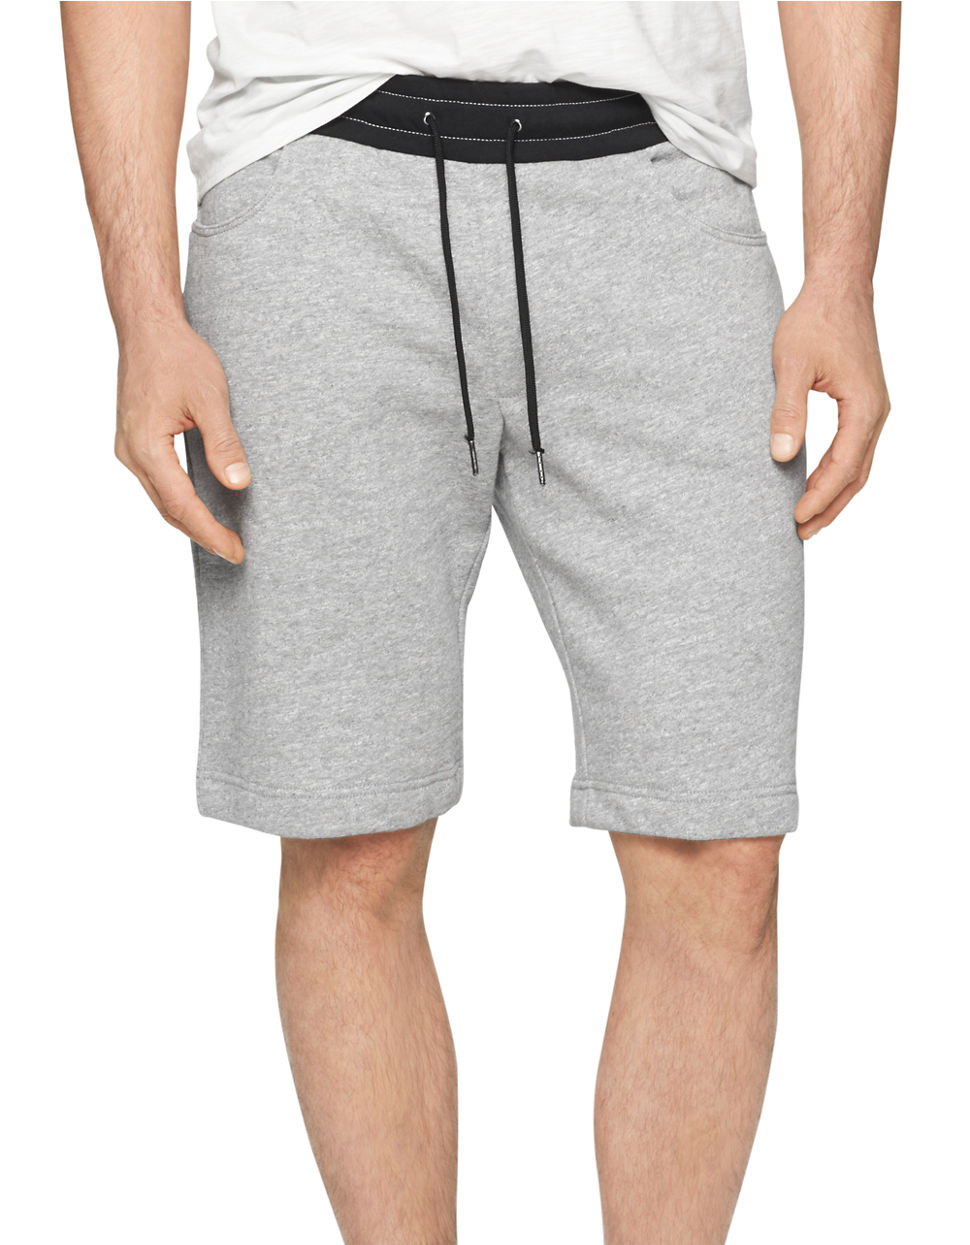 Calvin Klein Knit Athletic Shorts in Grey (Gray) for Men - Lyst